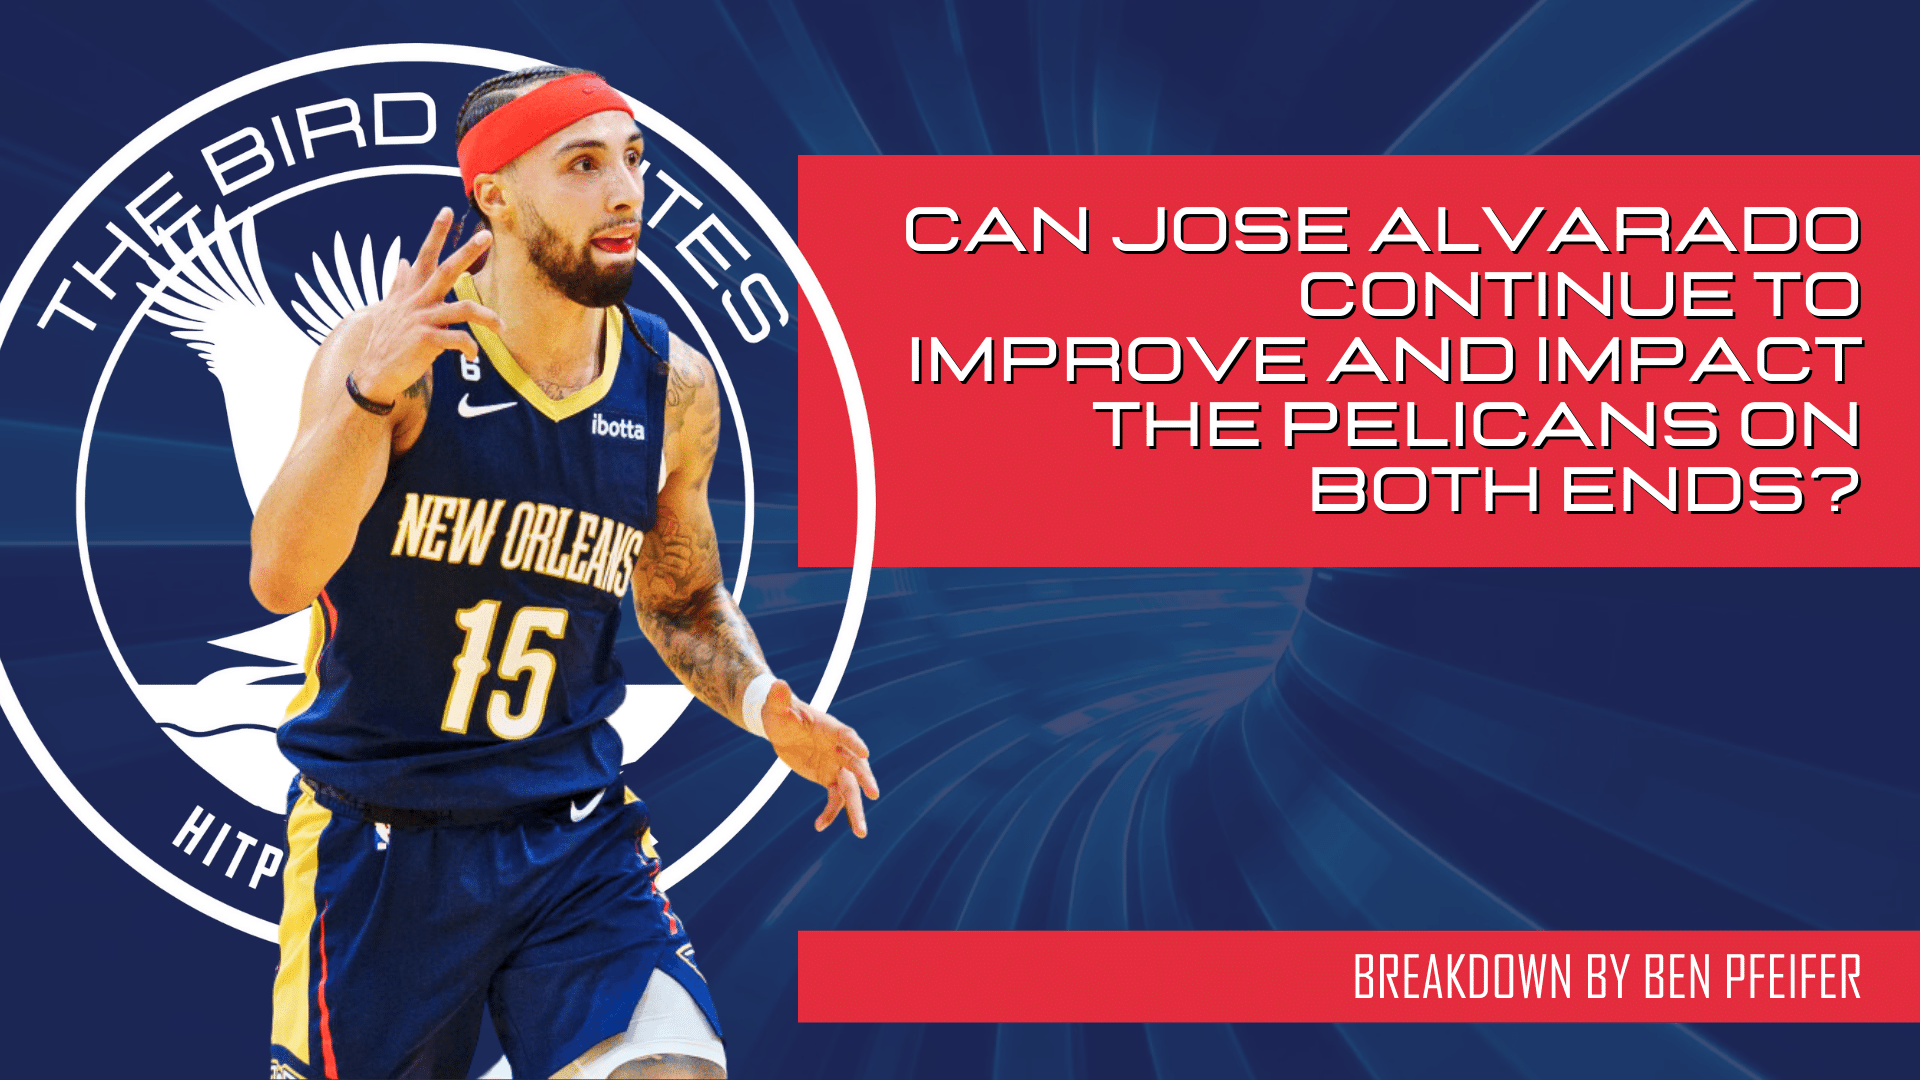 Can Jose Alvarado Continue To Improve and Impact the Pelicans on Both Ends?